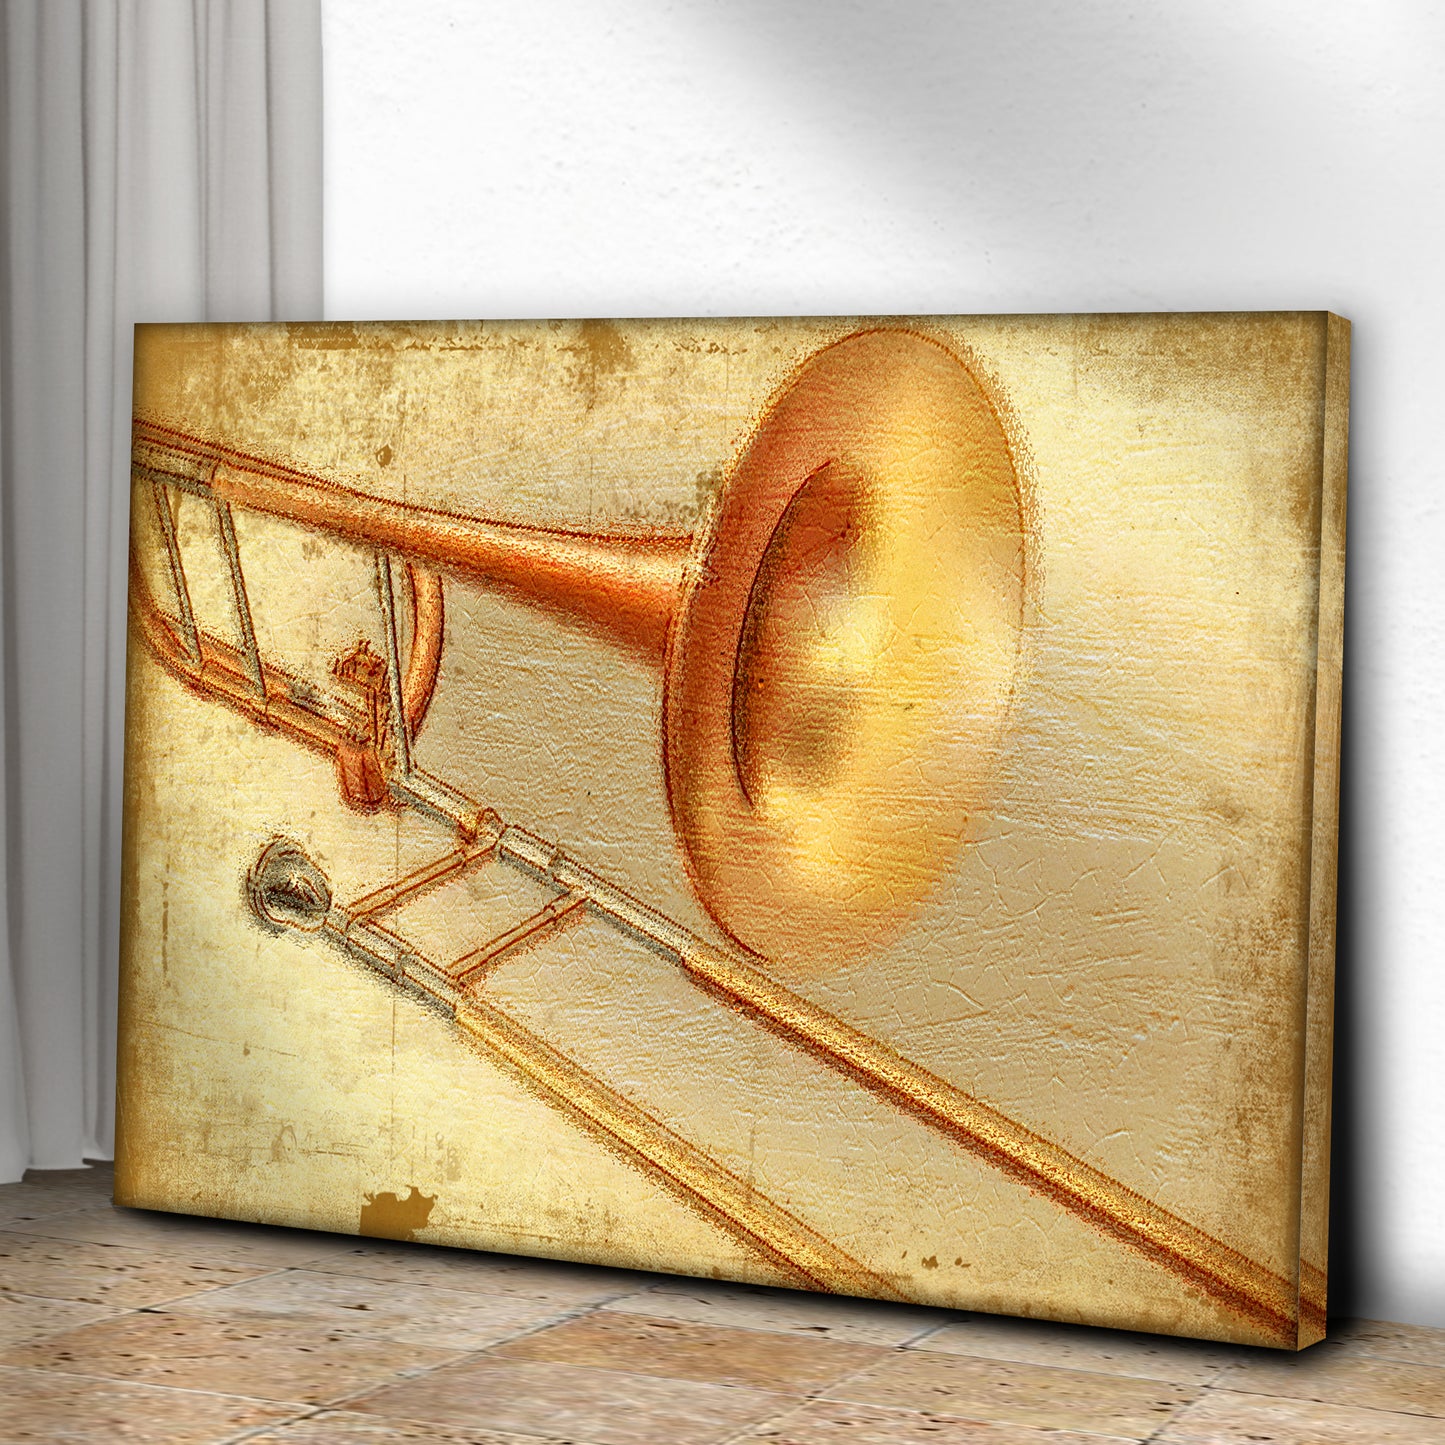 Trombone Rustic Canvas Wall Art - Image by Tailored Canvases